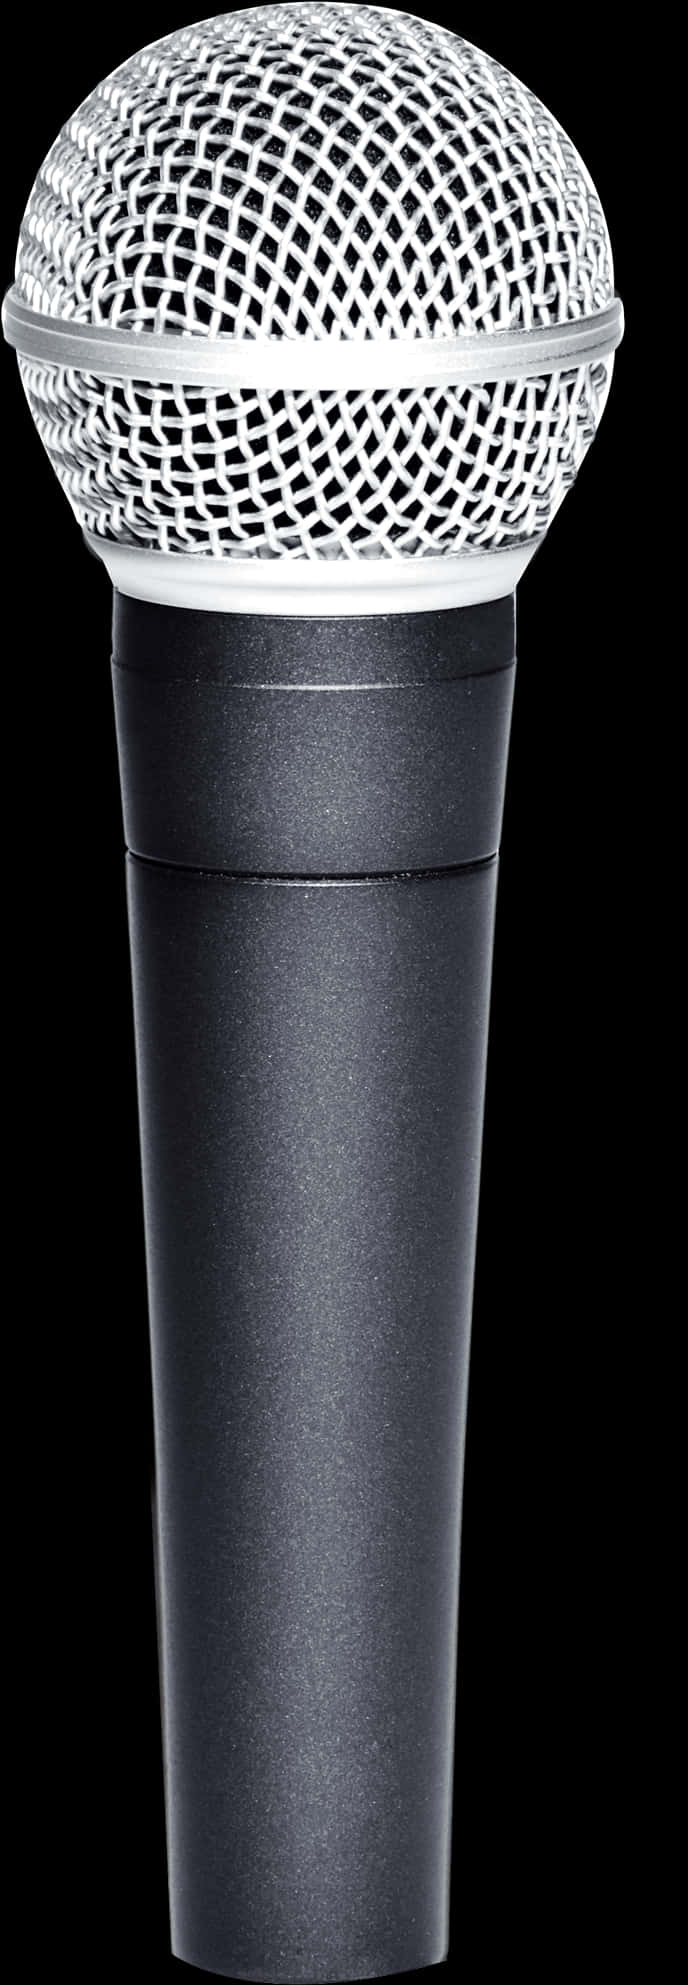 Professional Handheld Microphone Isolated PNG image